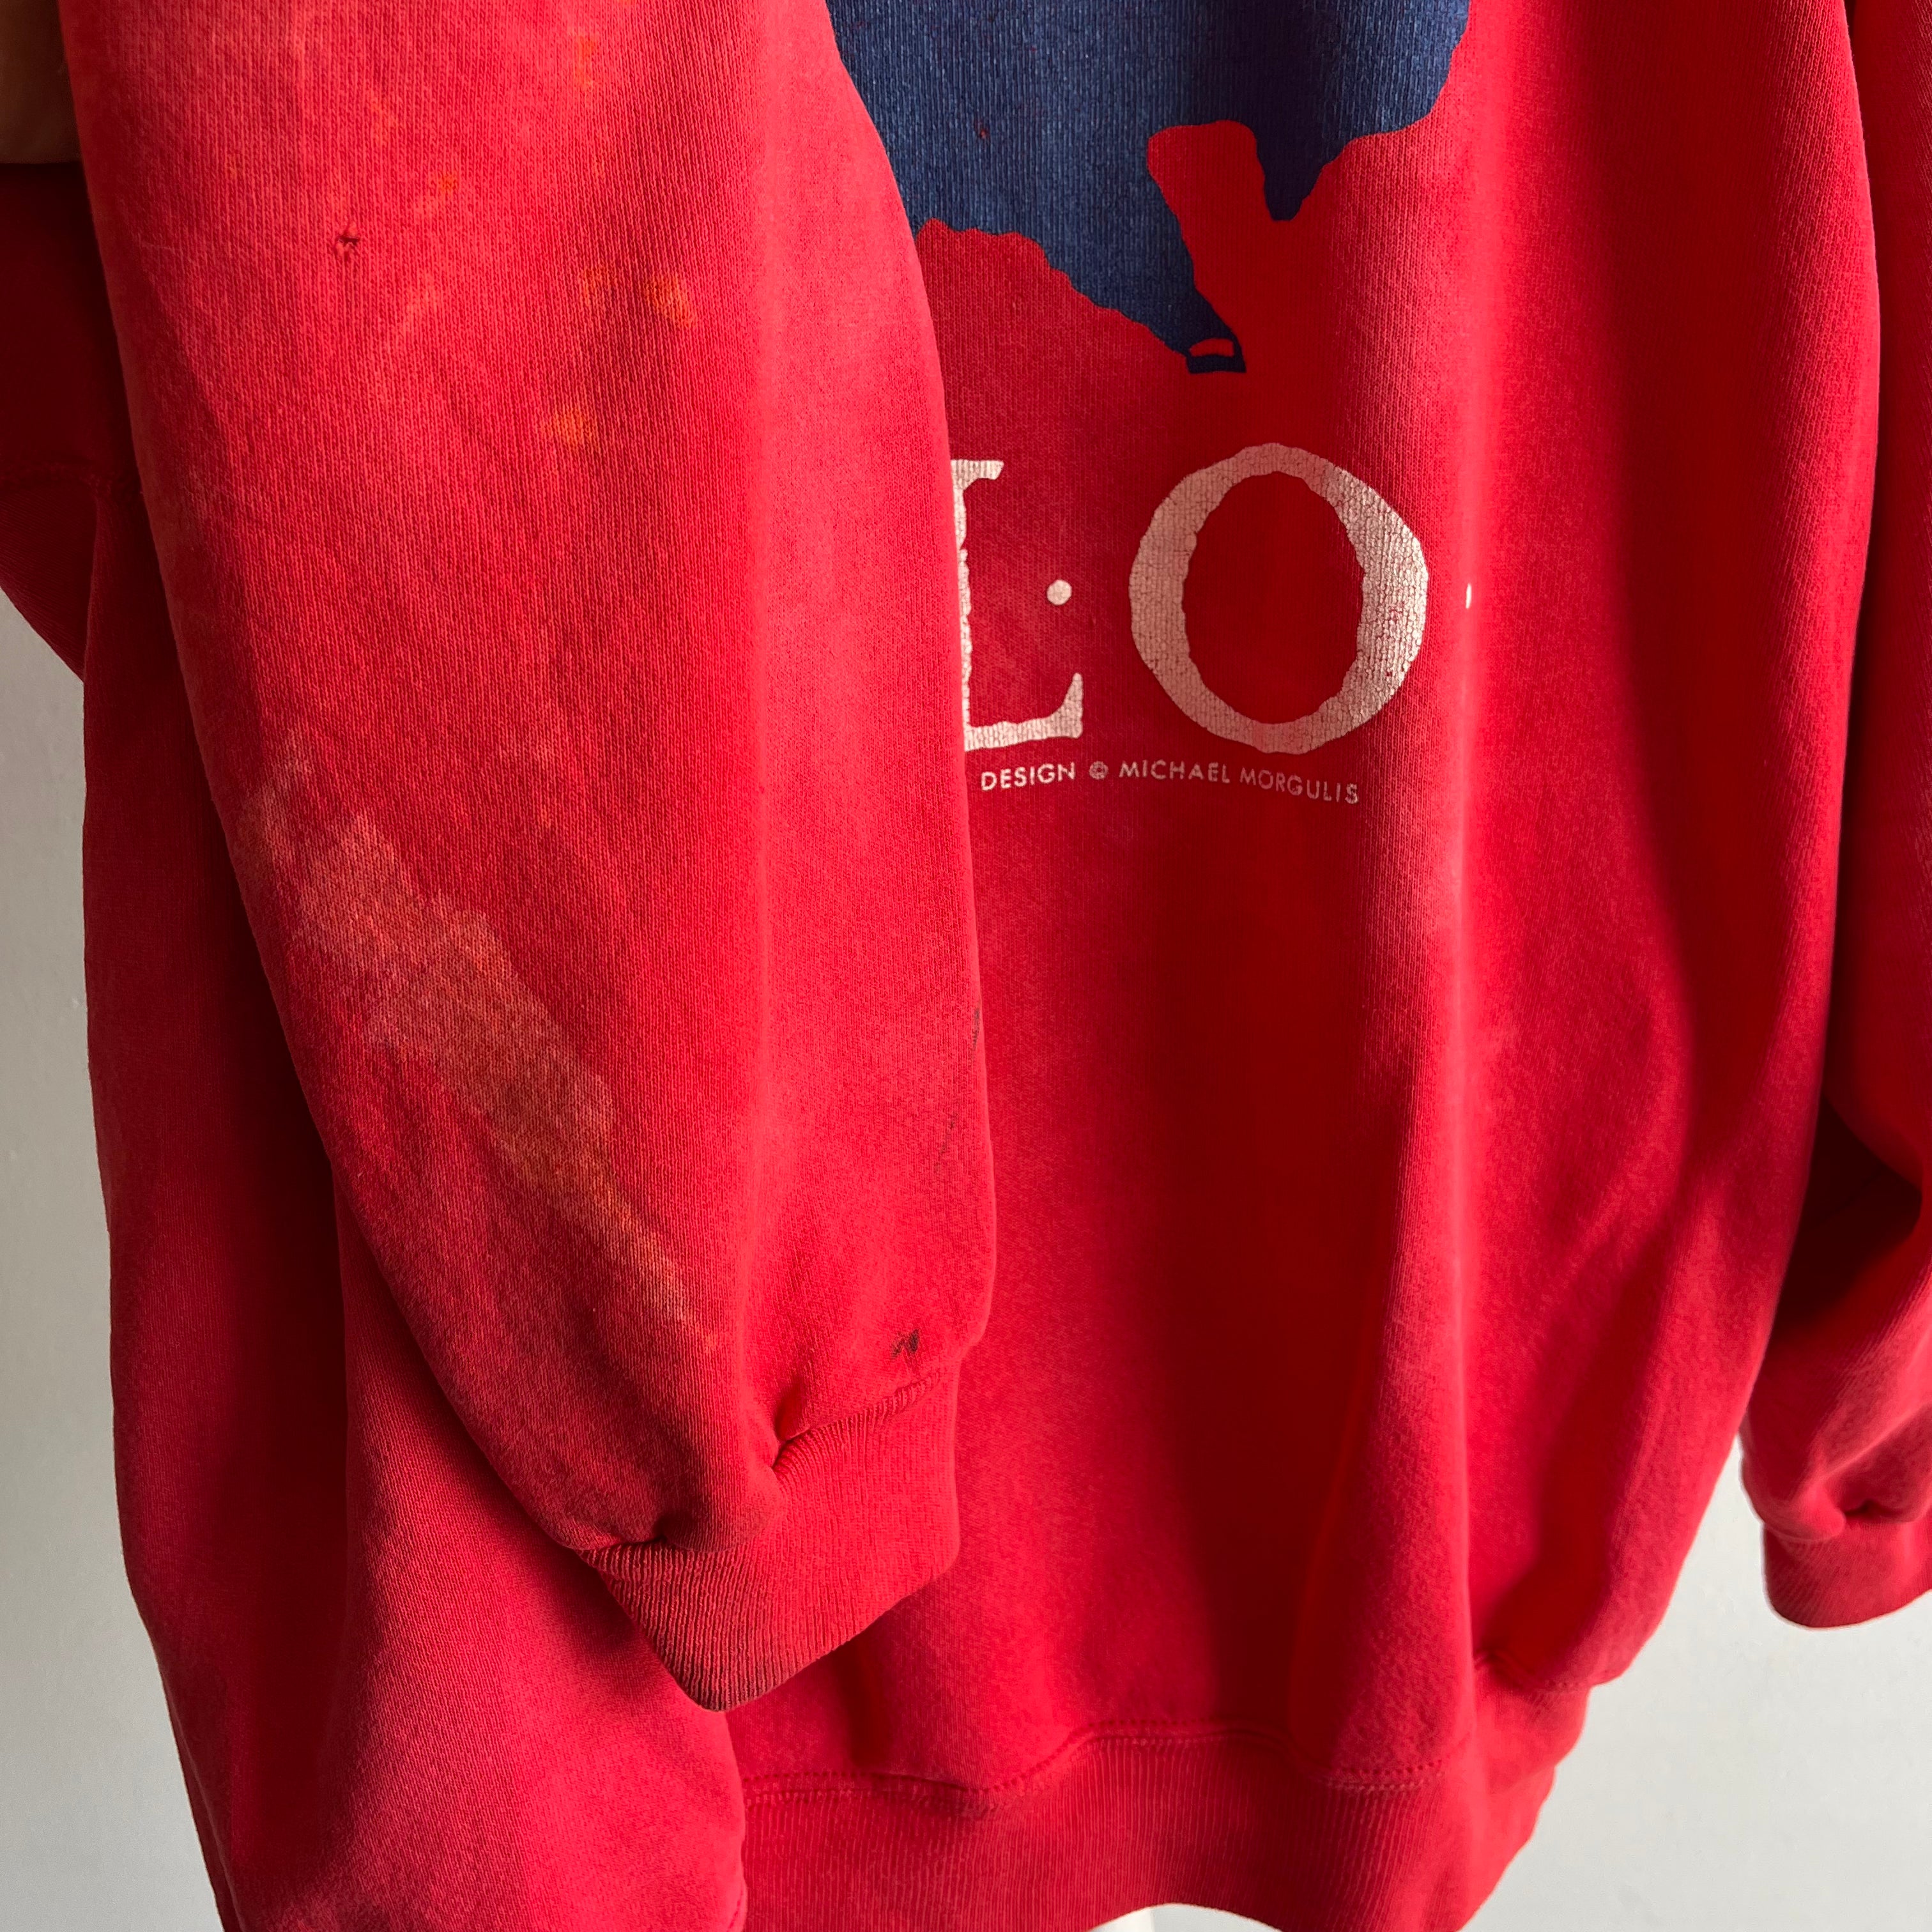 1990s BFLO Bleached Out Sun Faded Beyond Sweatshirt